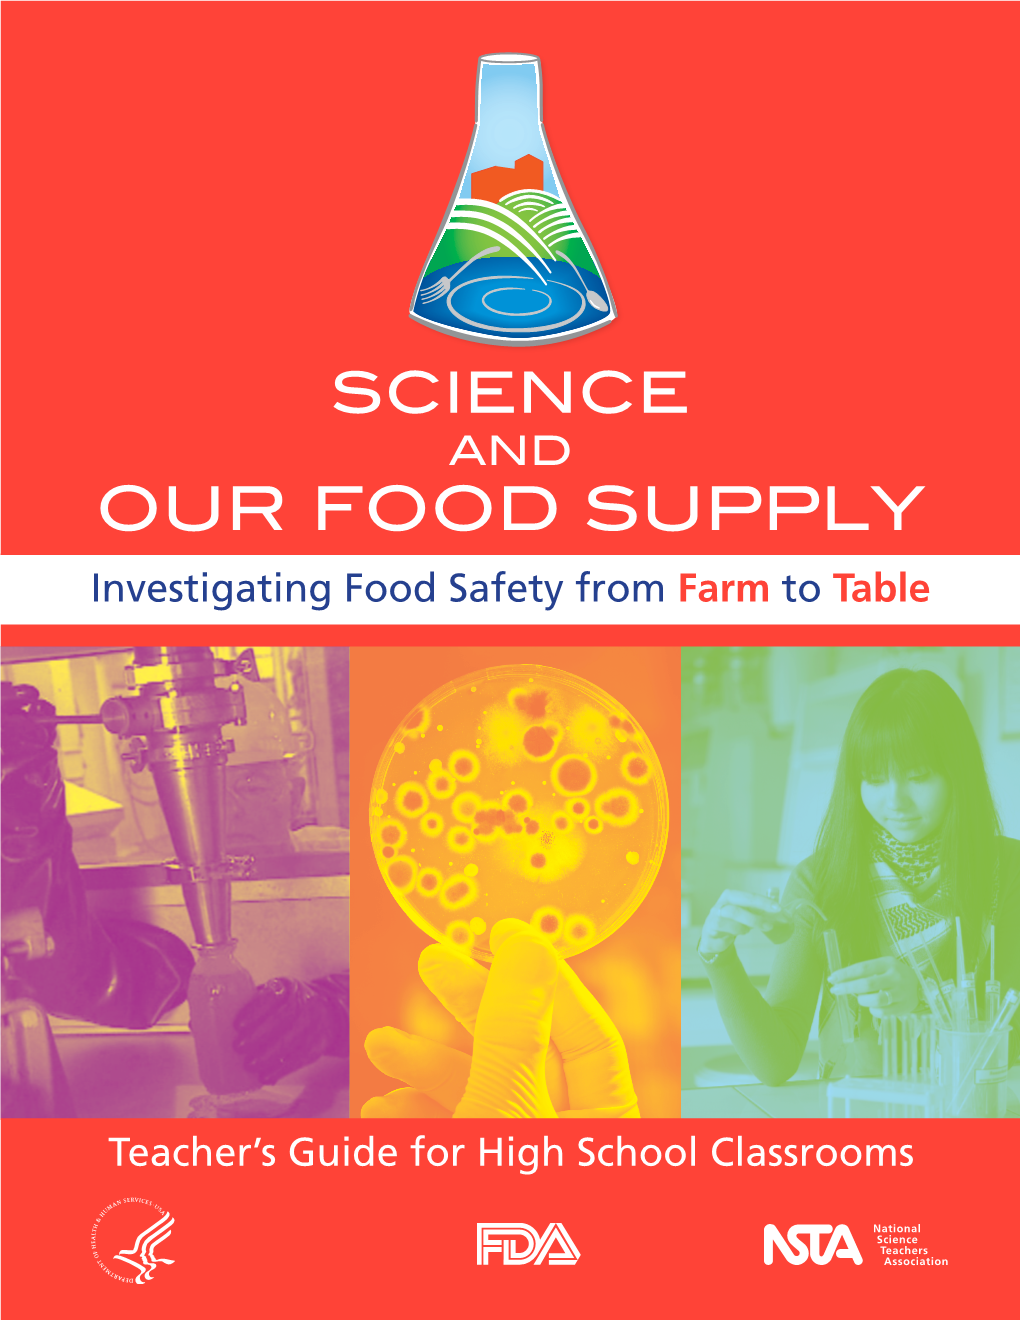 SCIENCE and OUR FOOD SUPPLY Investigating Food Safety from Farm to Table